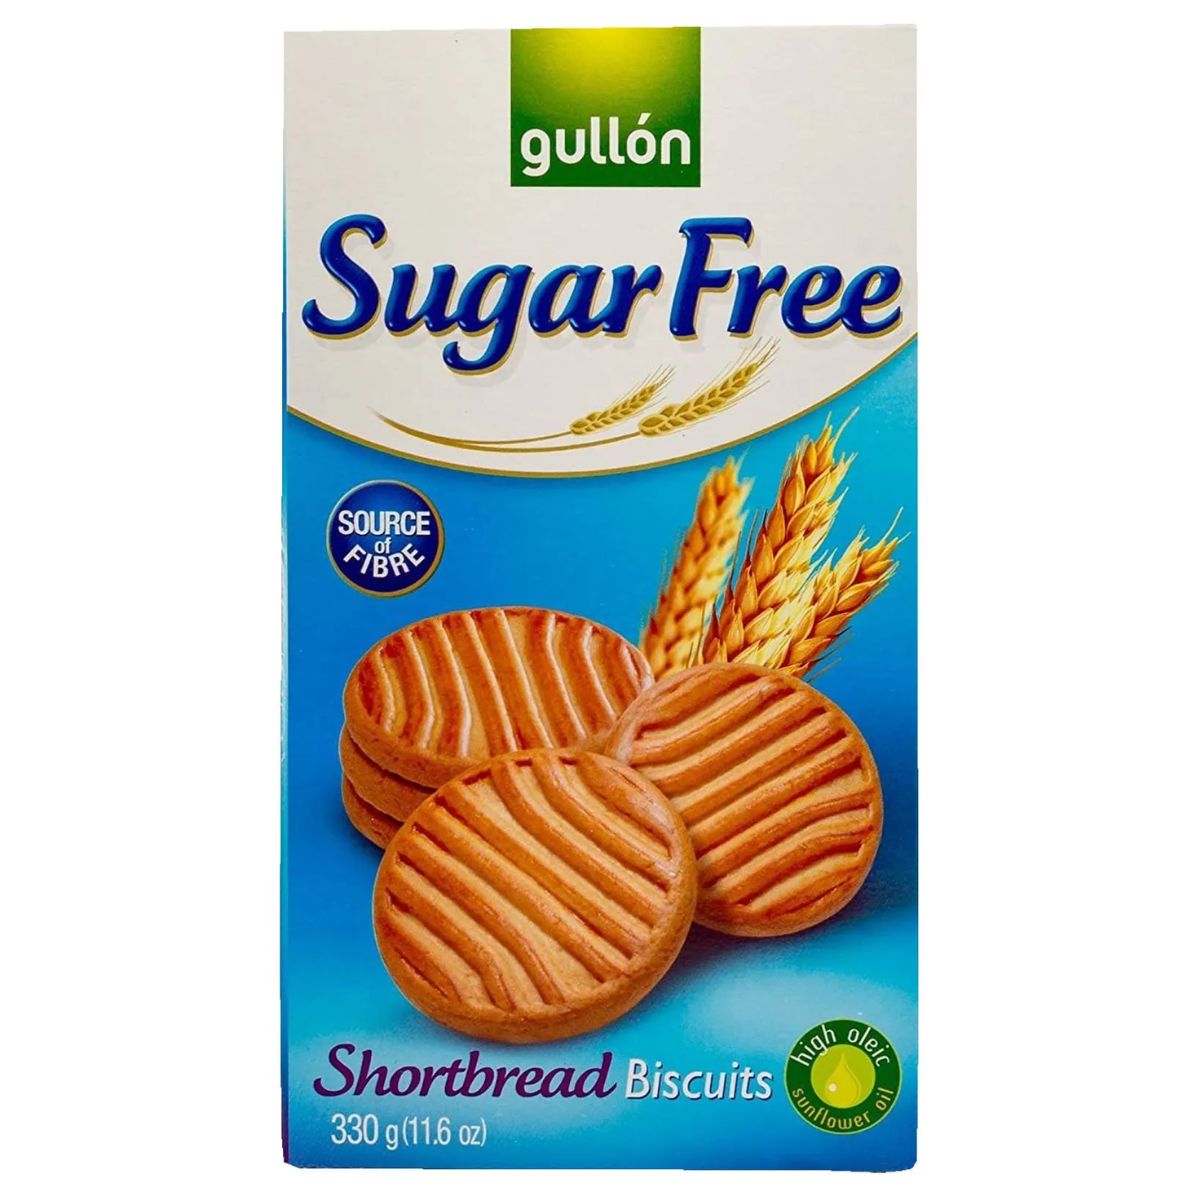 A box of Gullon - Sugar Free Shortbread Biscuit - 330g biscuits.